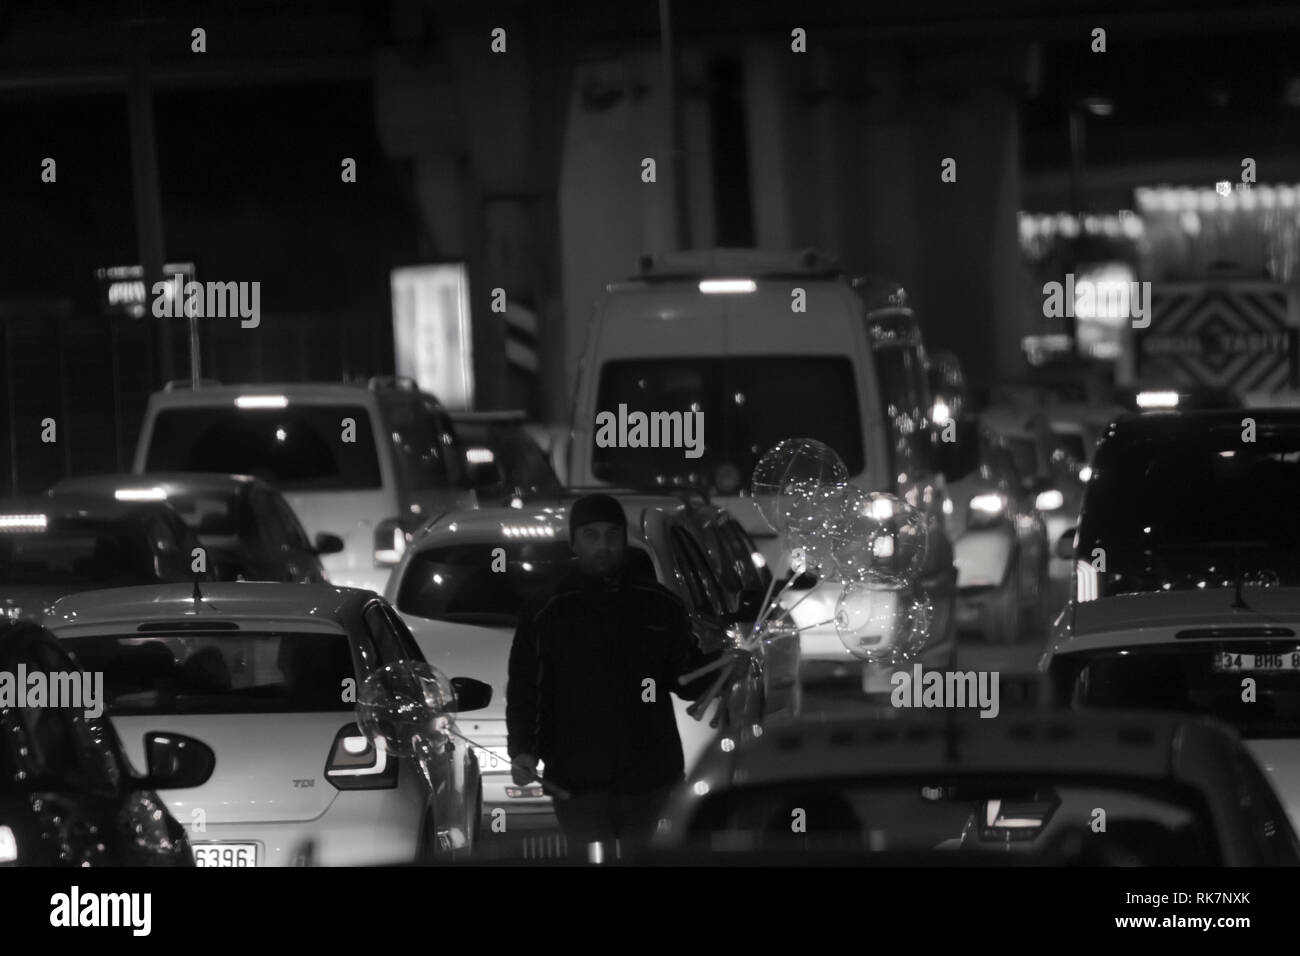 Vendor man sells led-light balloons at night at highway during a traffic jam in Altunizade, Asian side of Istanbul in black and white image. Stock Photo